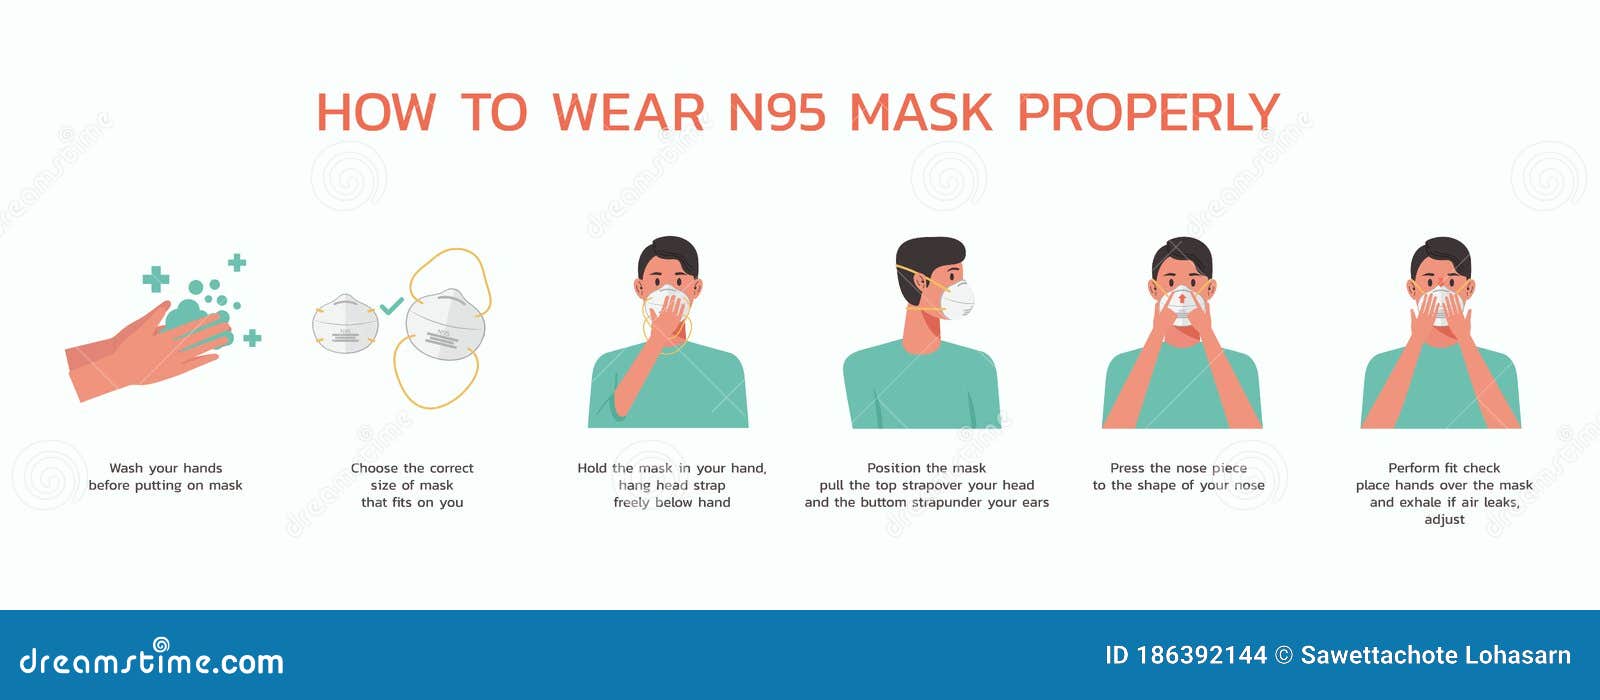 how to wear a n95 respirator properly infographic